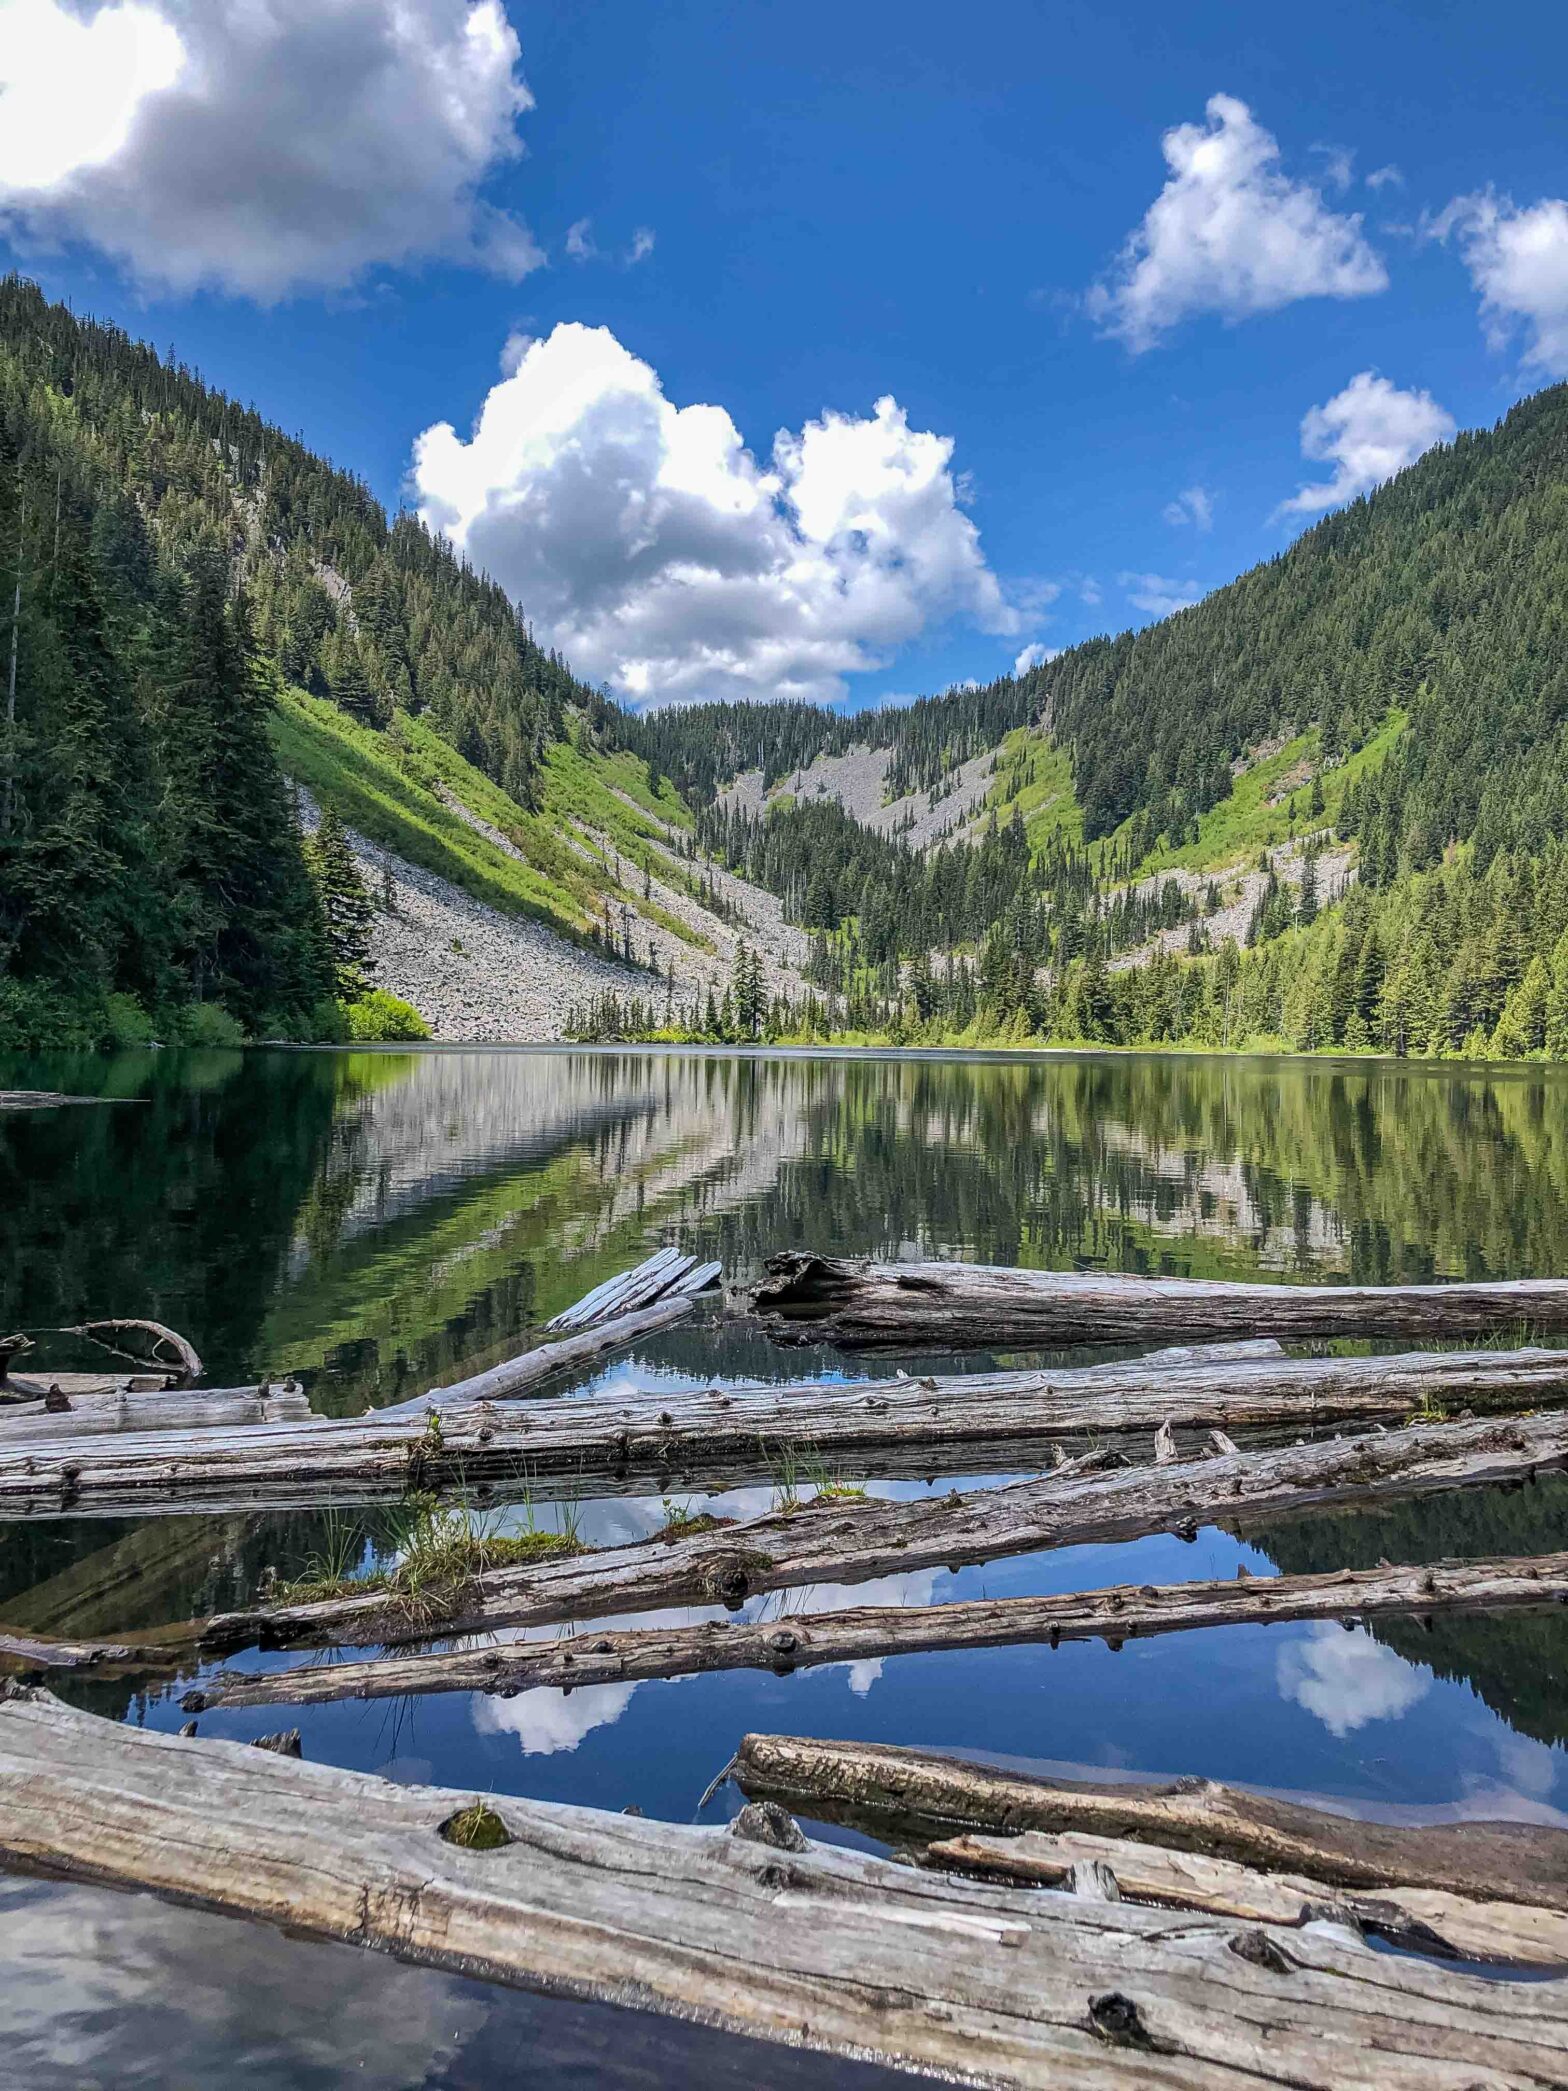 Talapus and Olallie Lakes: How to Enjoy Your Visit